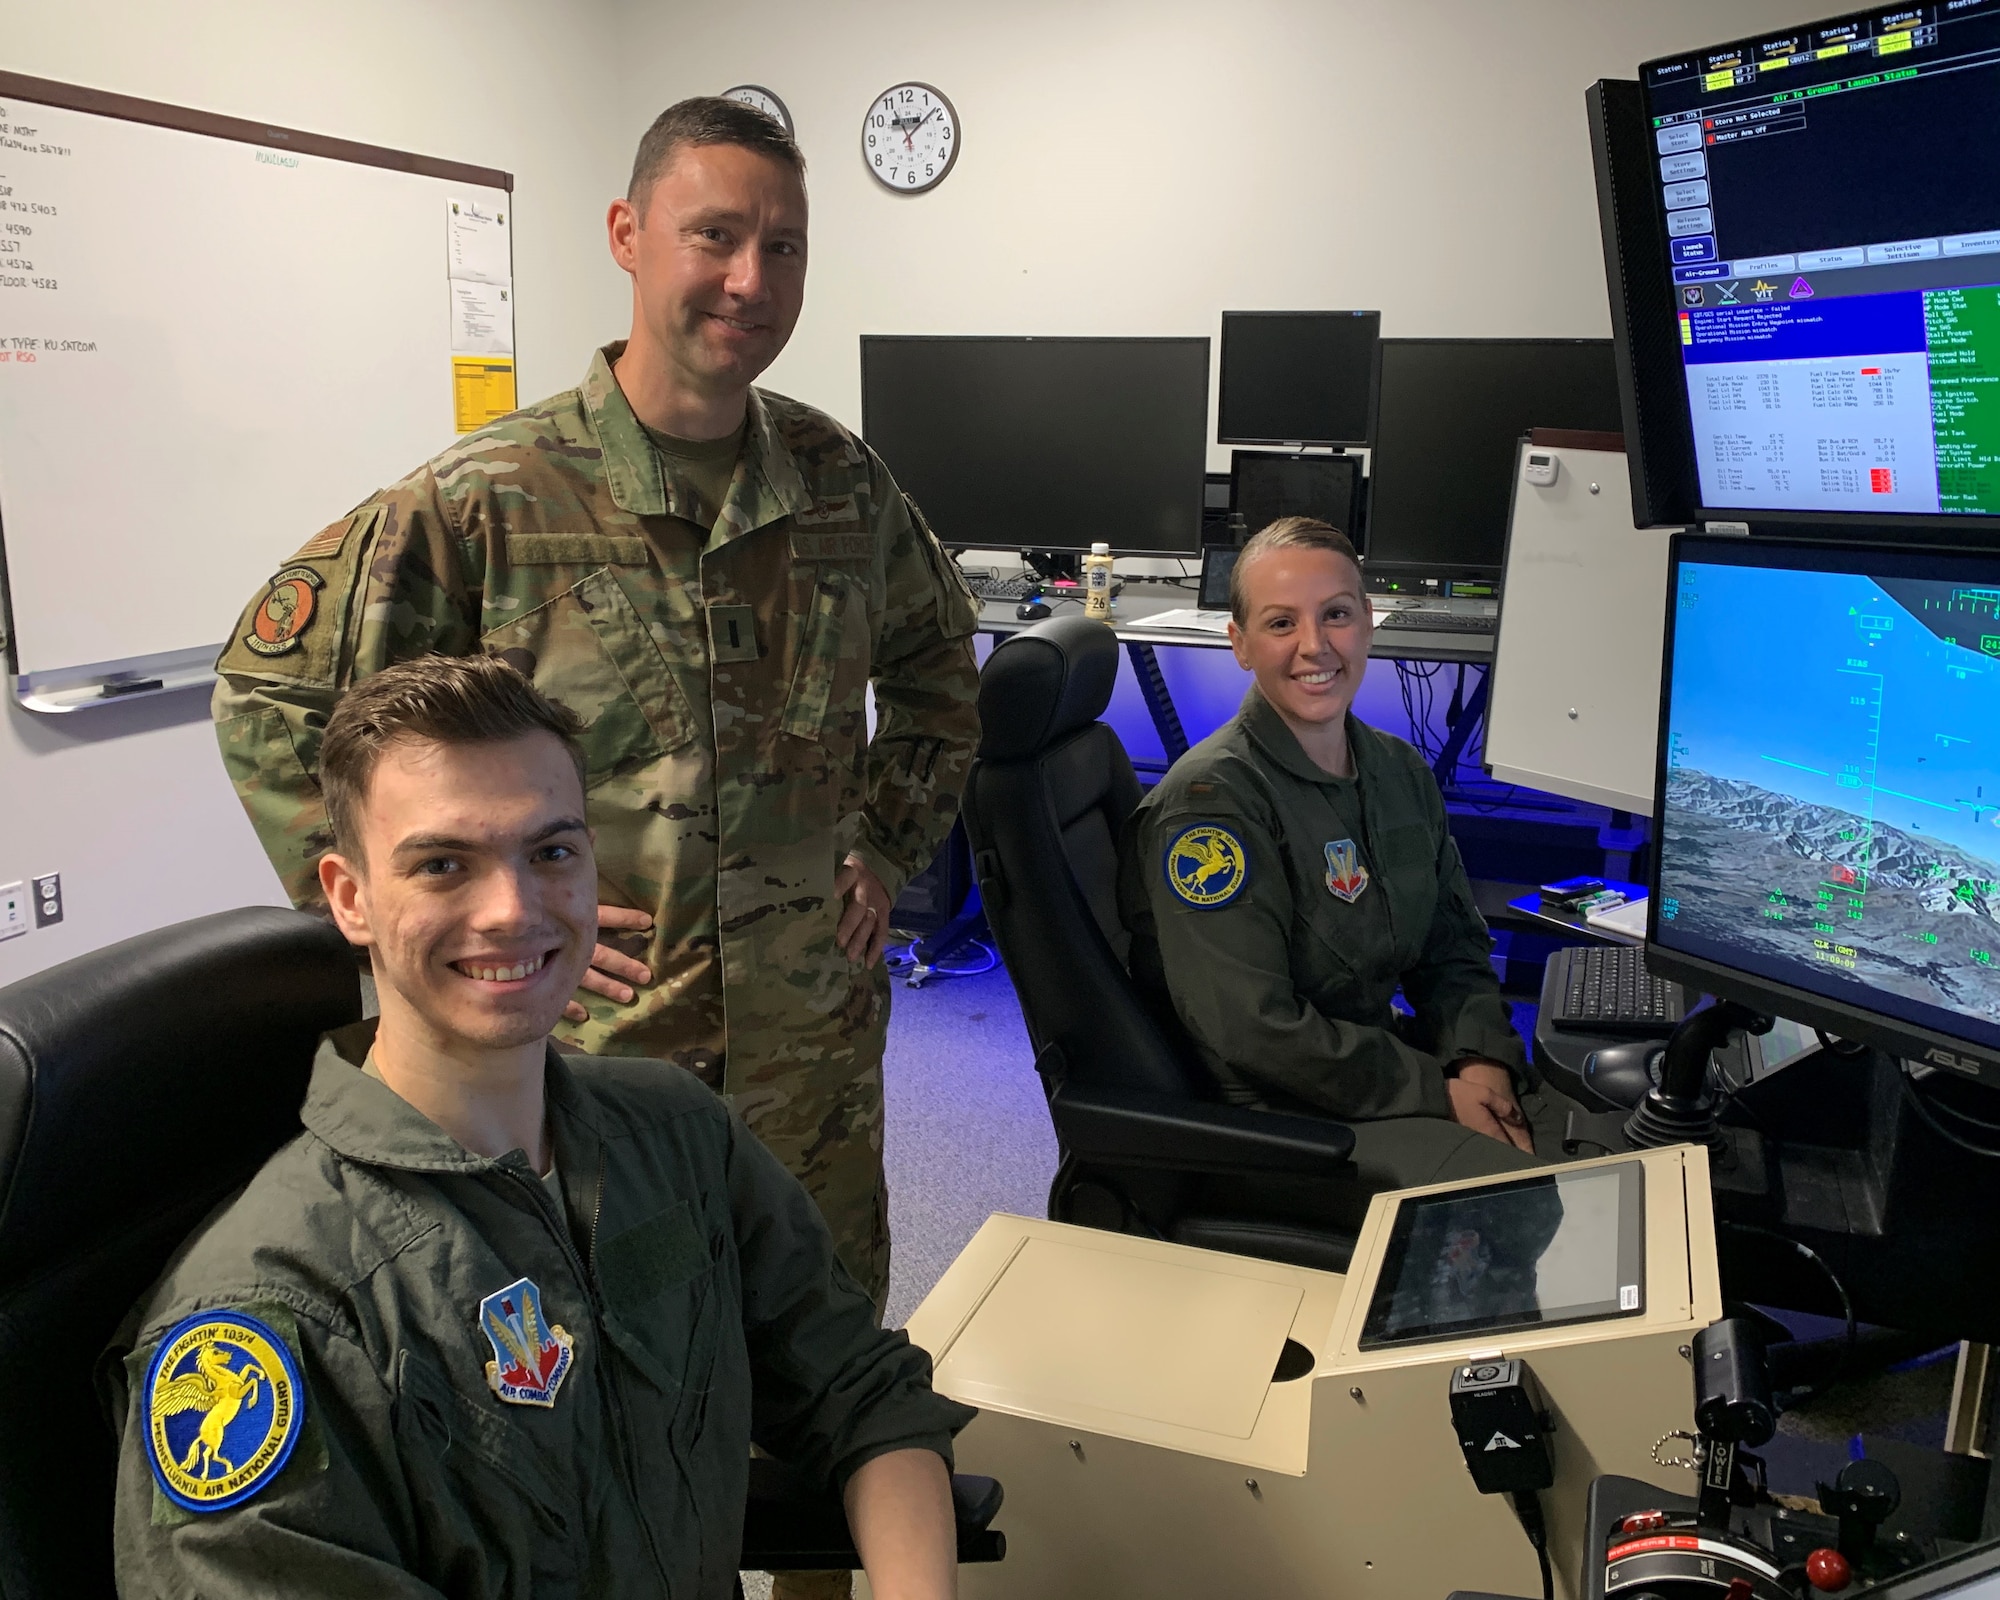 Two men and a woman, all in uniform, pose for a photo near an MQ-9 Flight simulator.